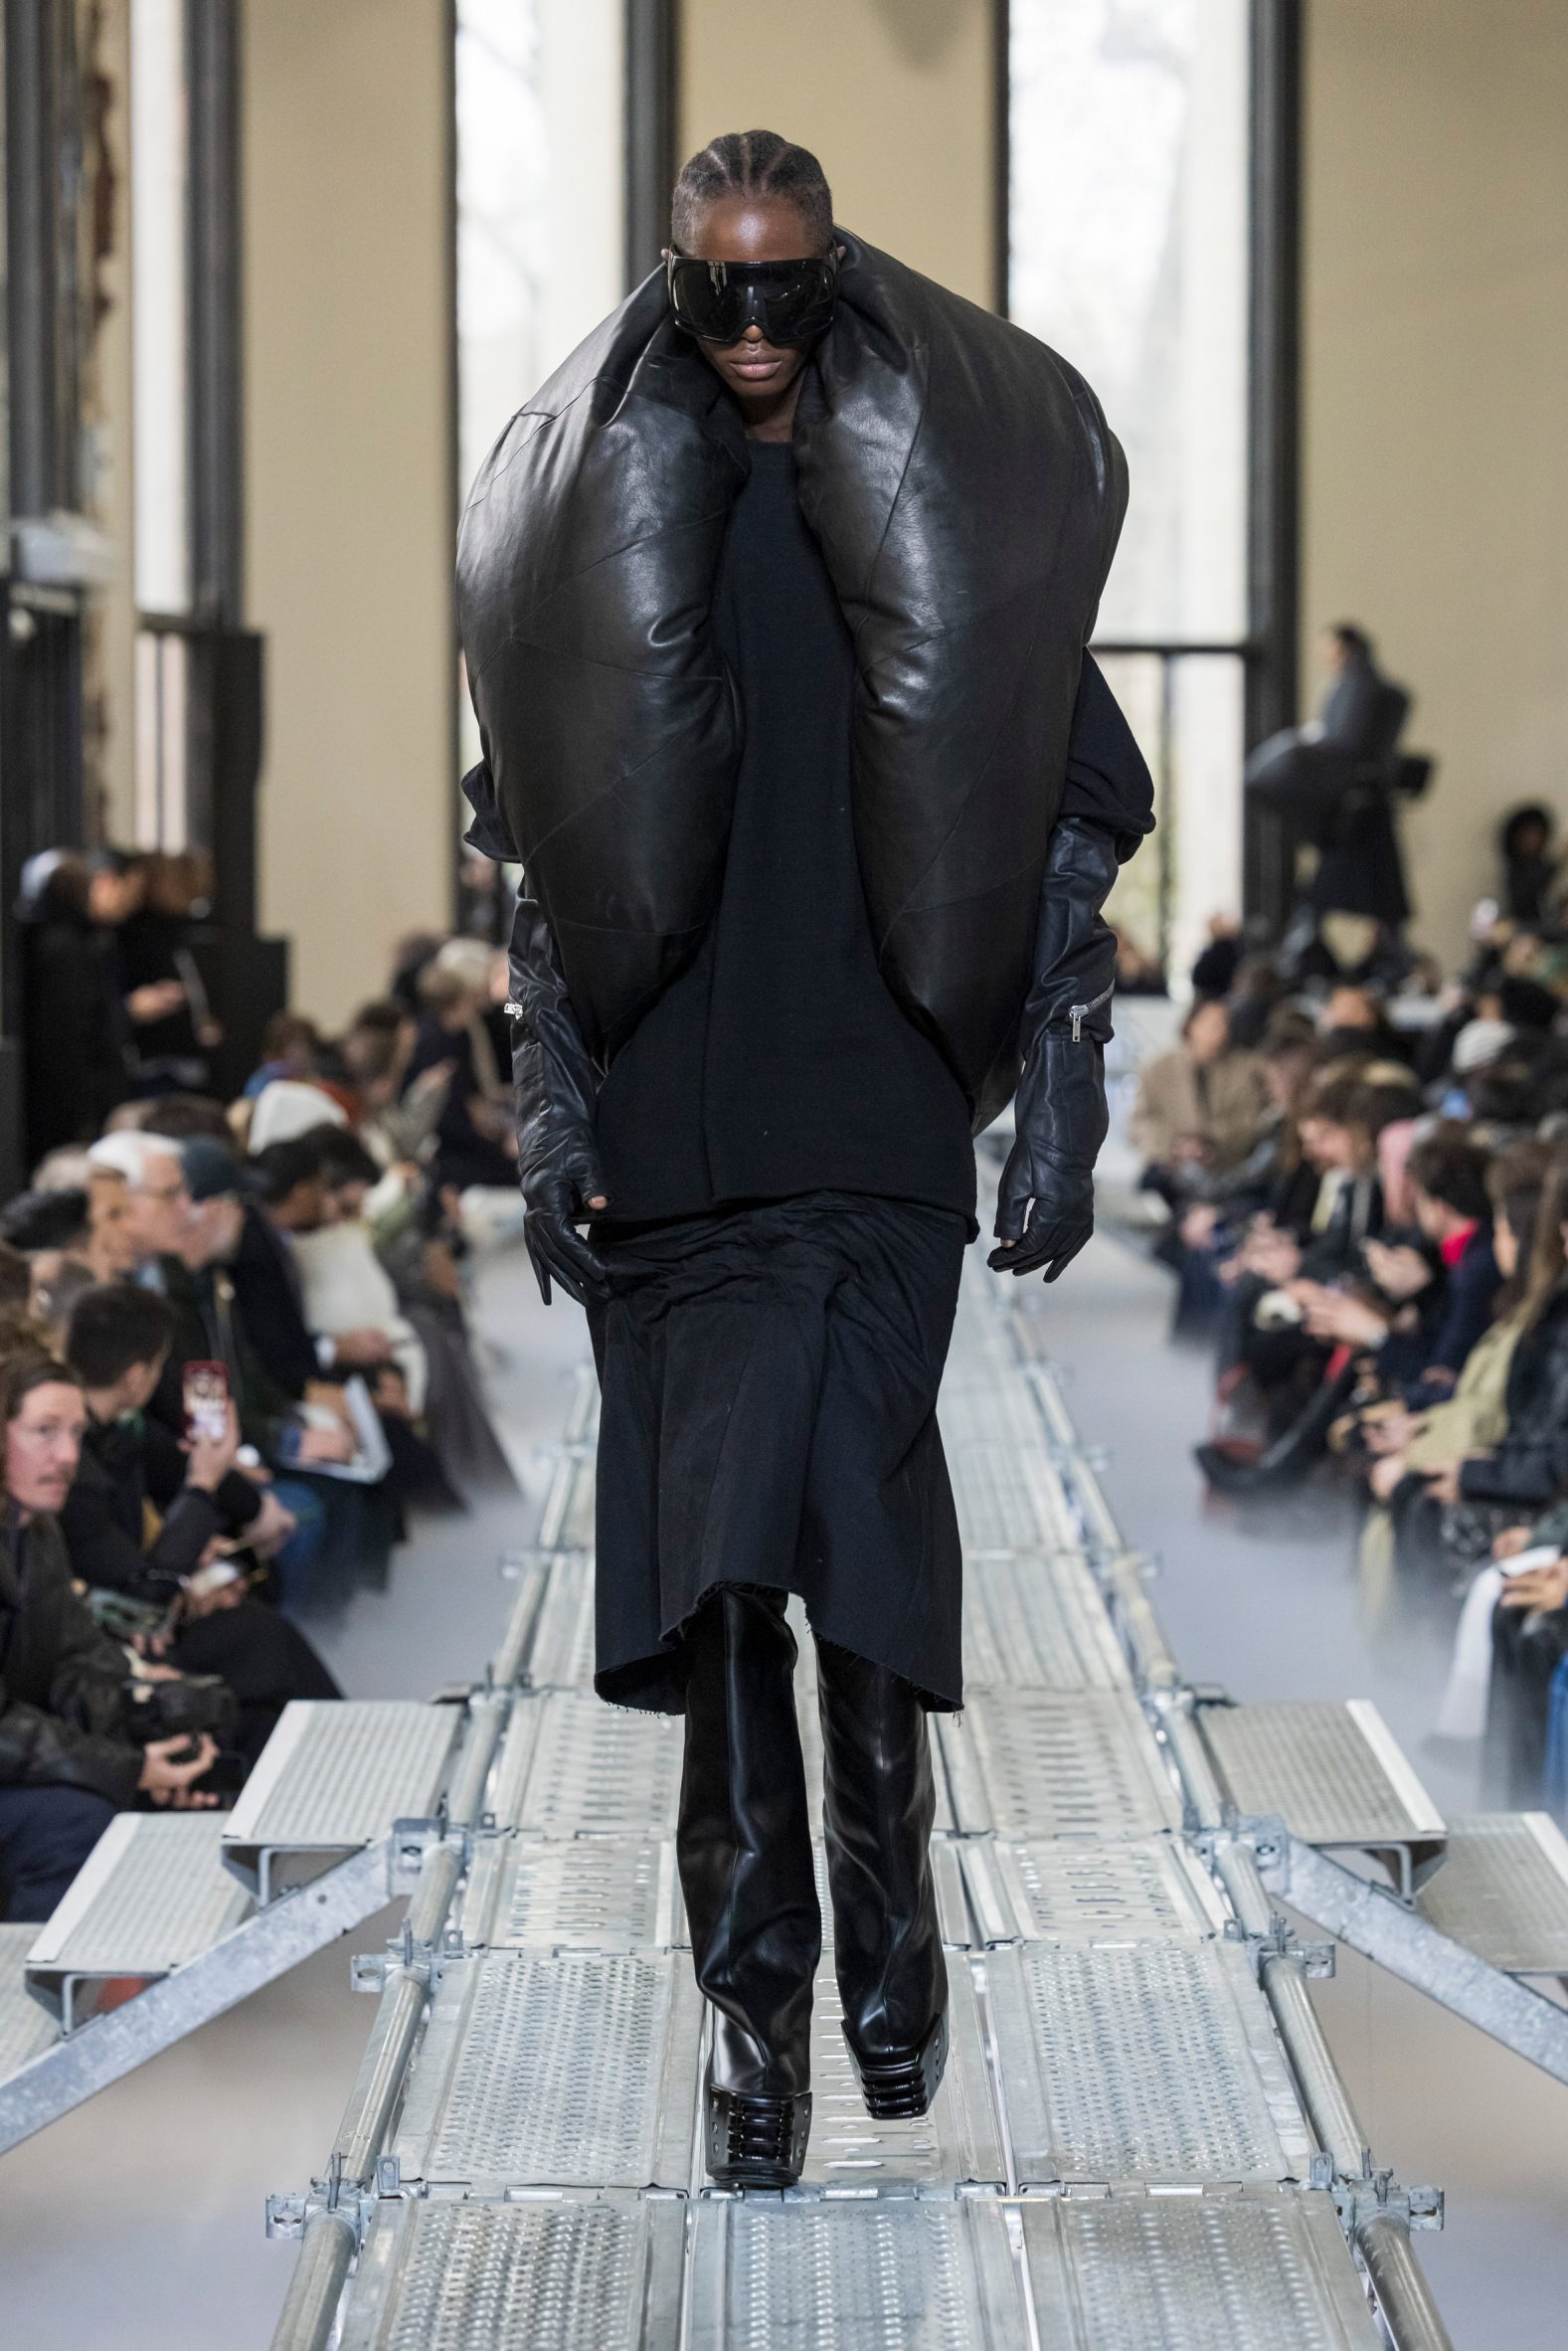 Rick Owens Brings the Runway Home, and Other News – SURFACE